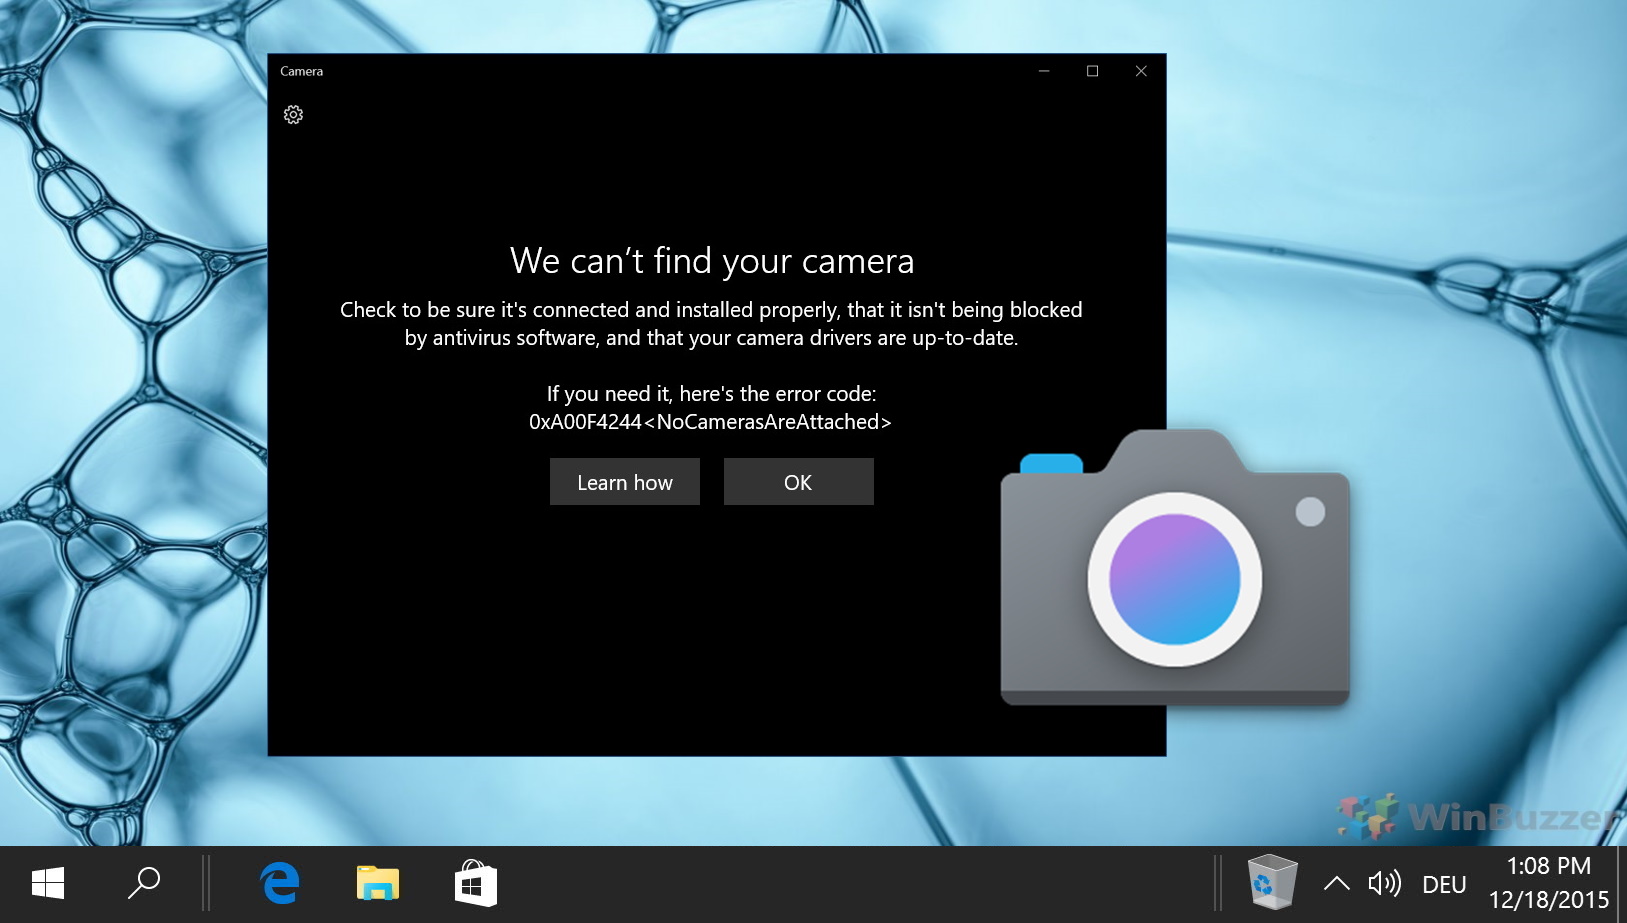 Try uninstalling and reinstalling the camera drivers.
If using an external camera, test it on a different USB port.